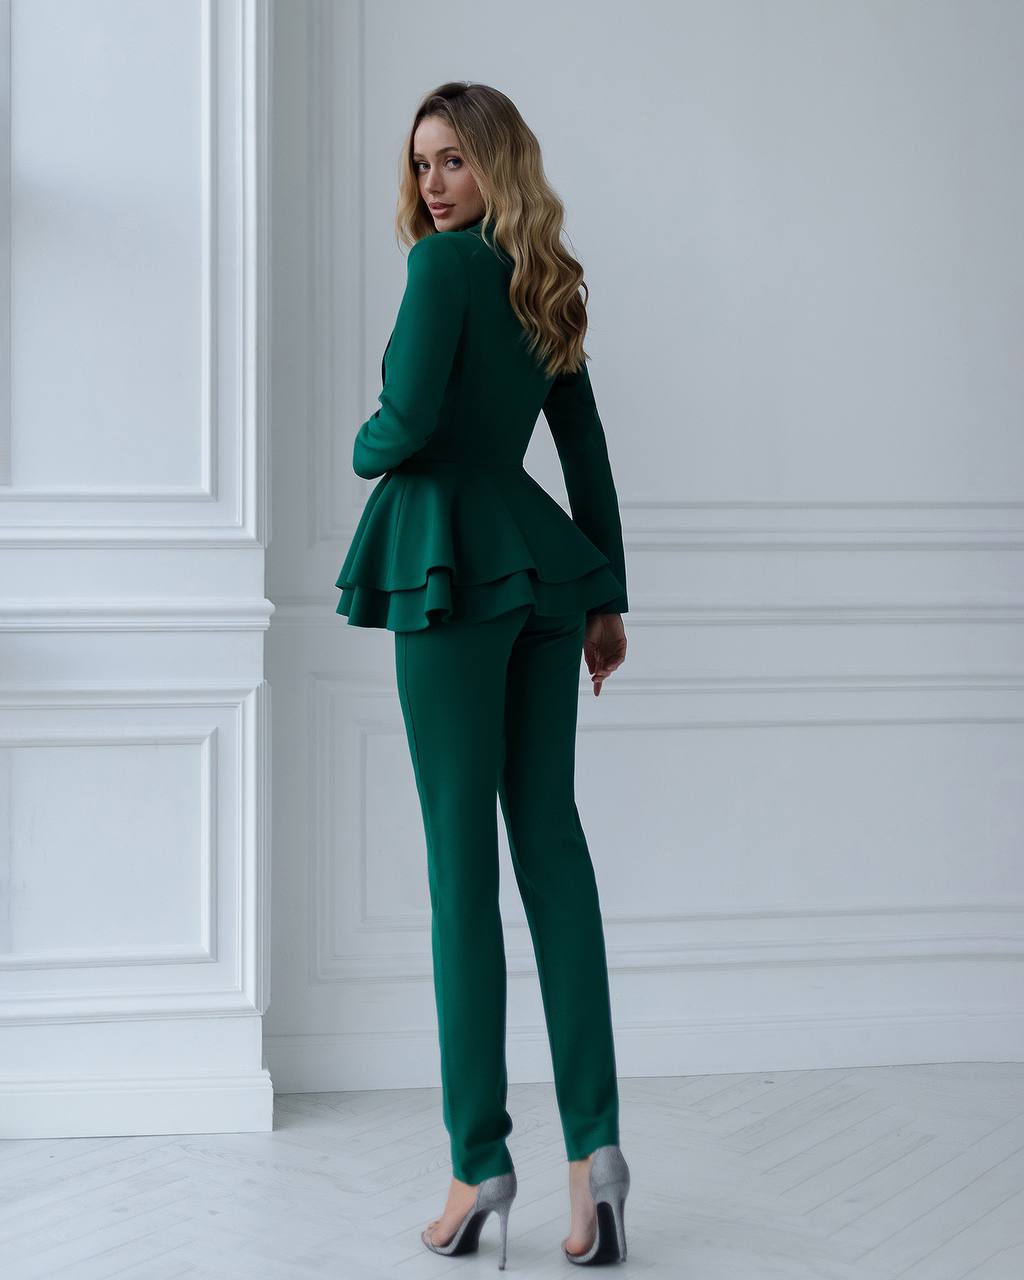 a woman wearing a green suit and high heels